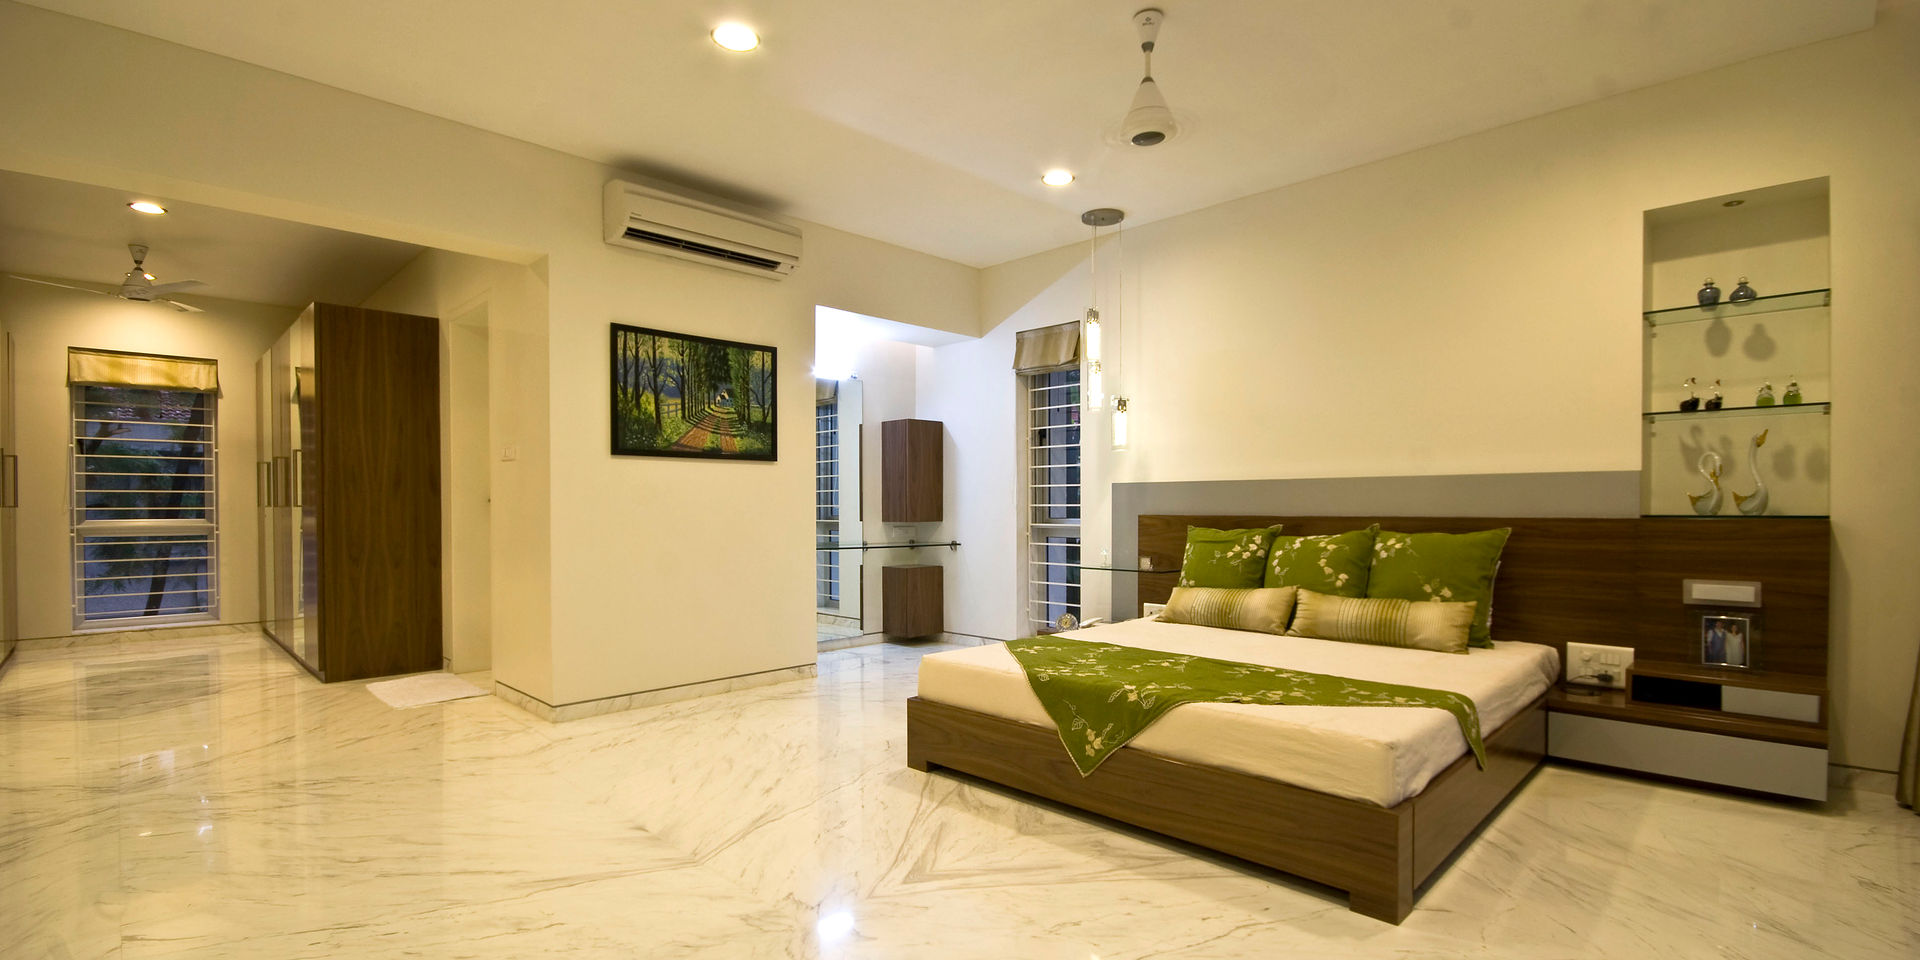 Private Residence at Sopan Baug, Pune Chaney Architects Bedroom